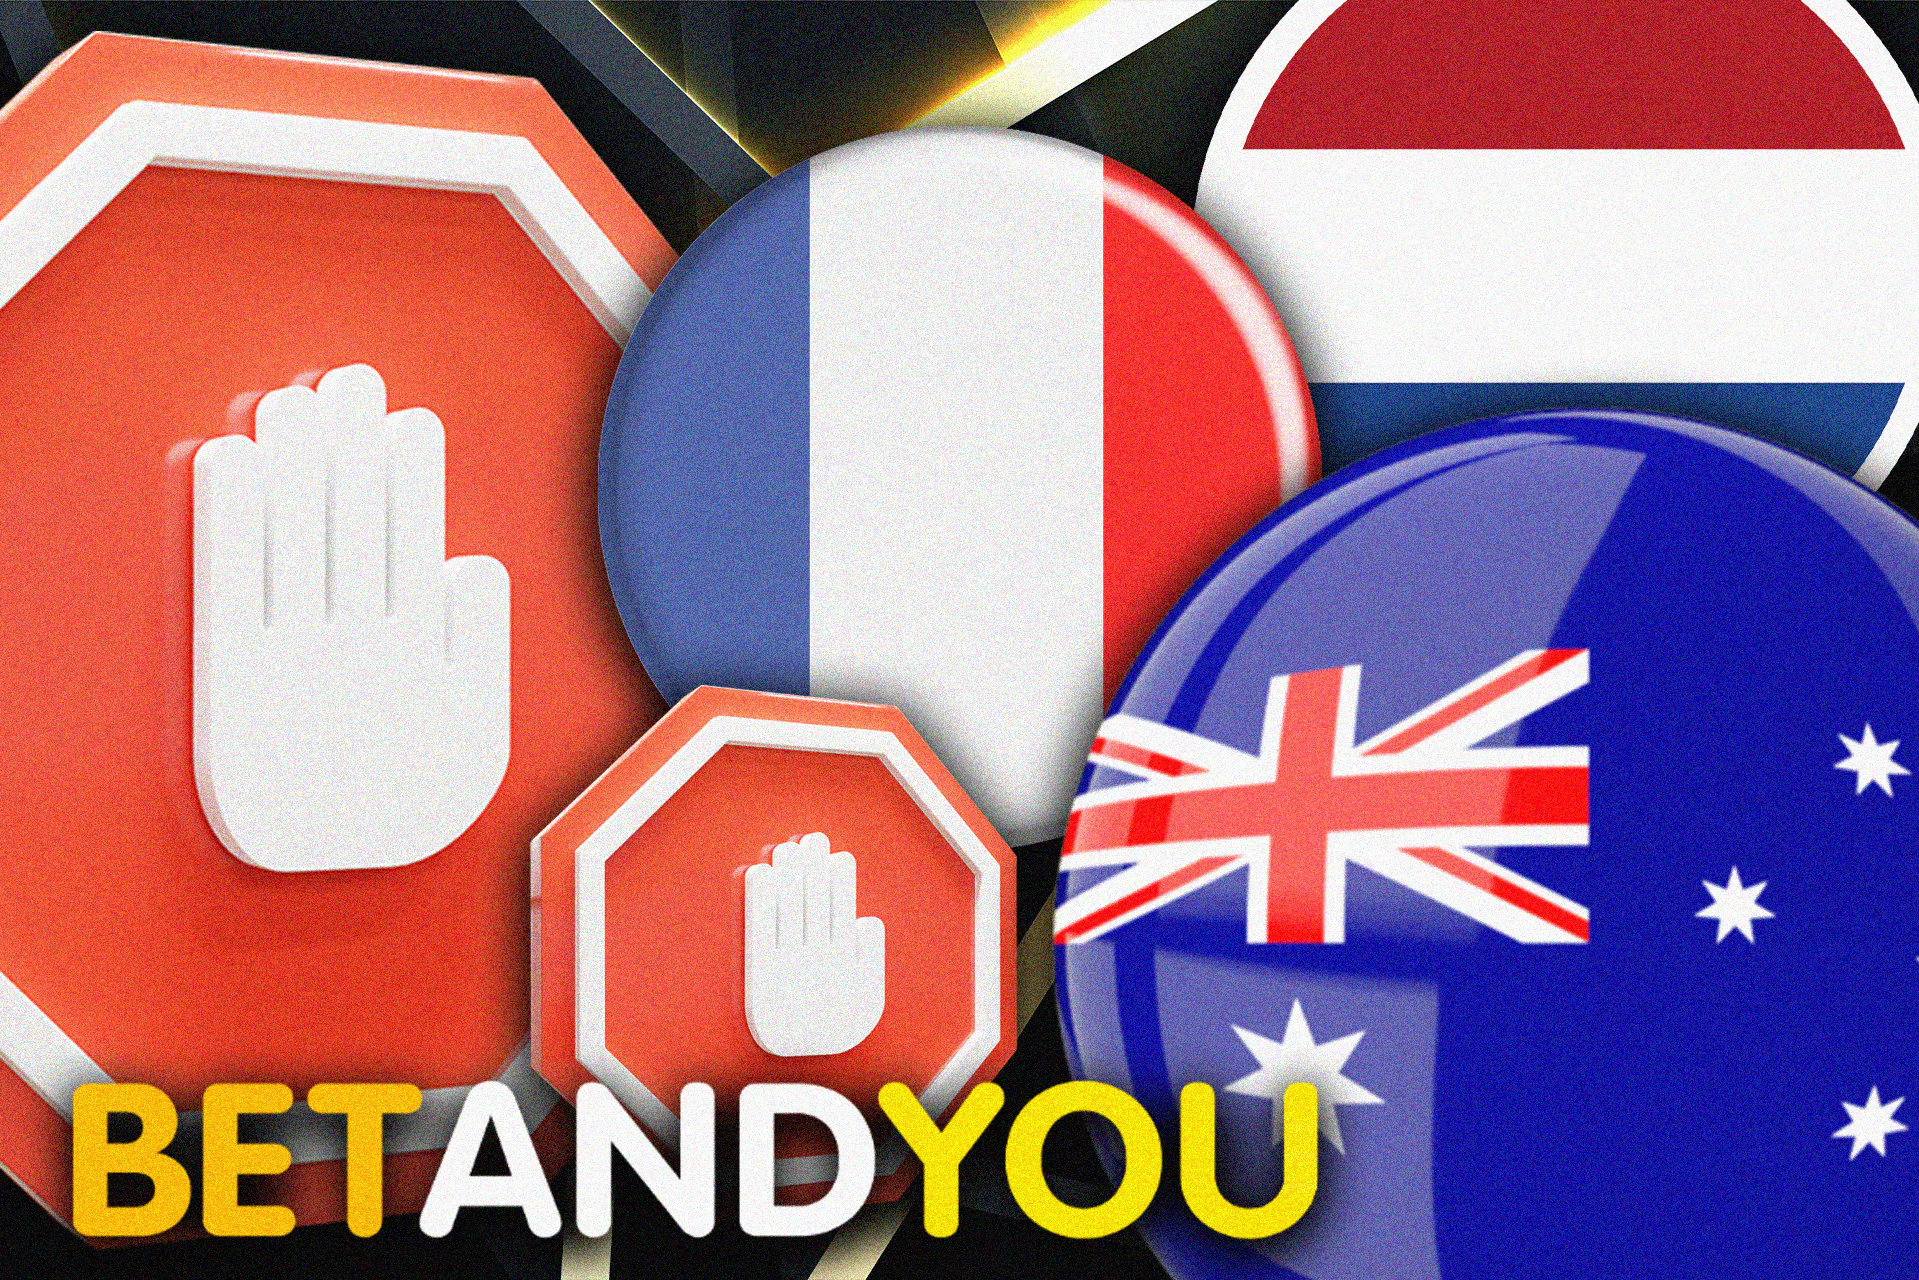 Betandyou operates not in every country.